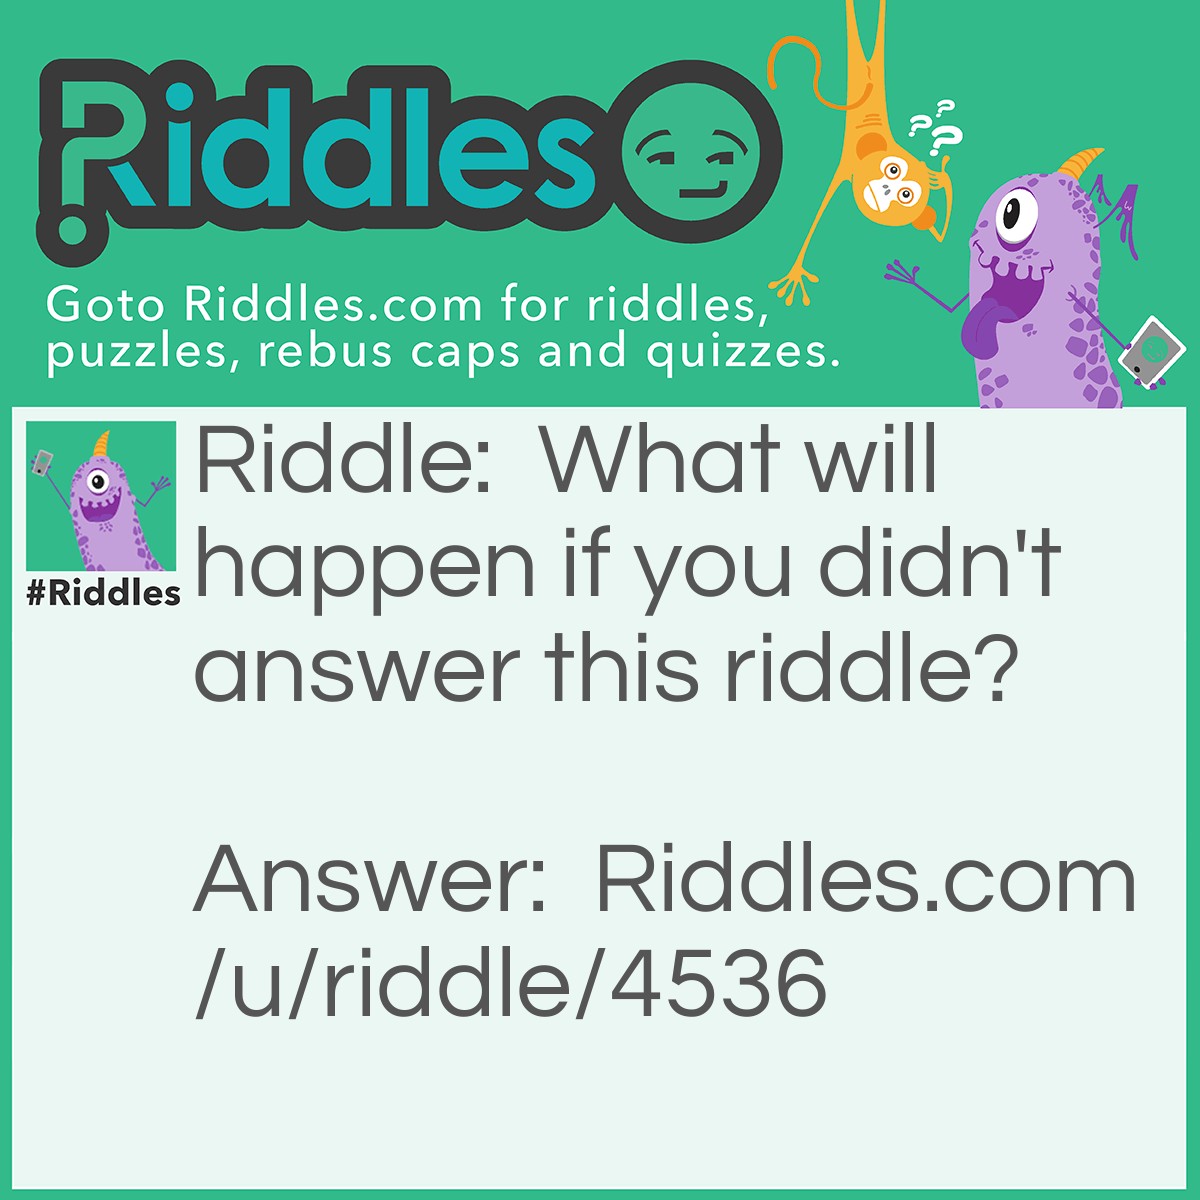 Riddle: What will happen if you didn't answer this riddle? Answer: The riddle "Riddle?" will not been answered by you.